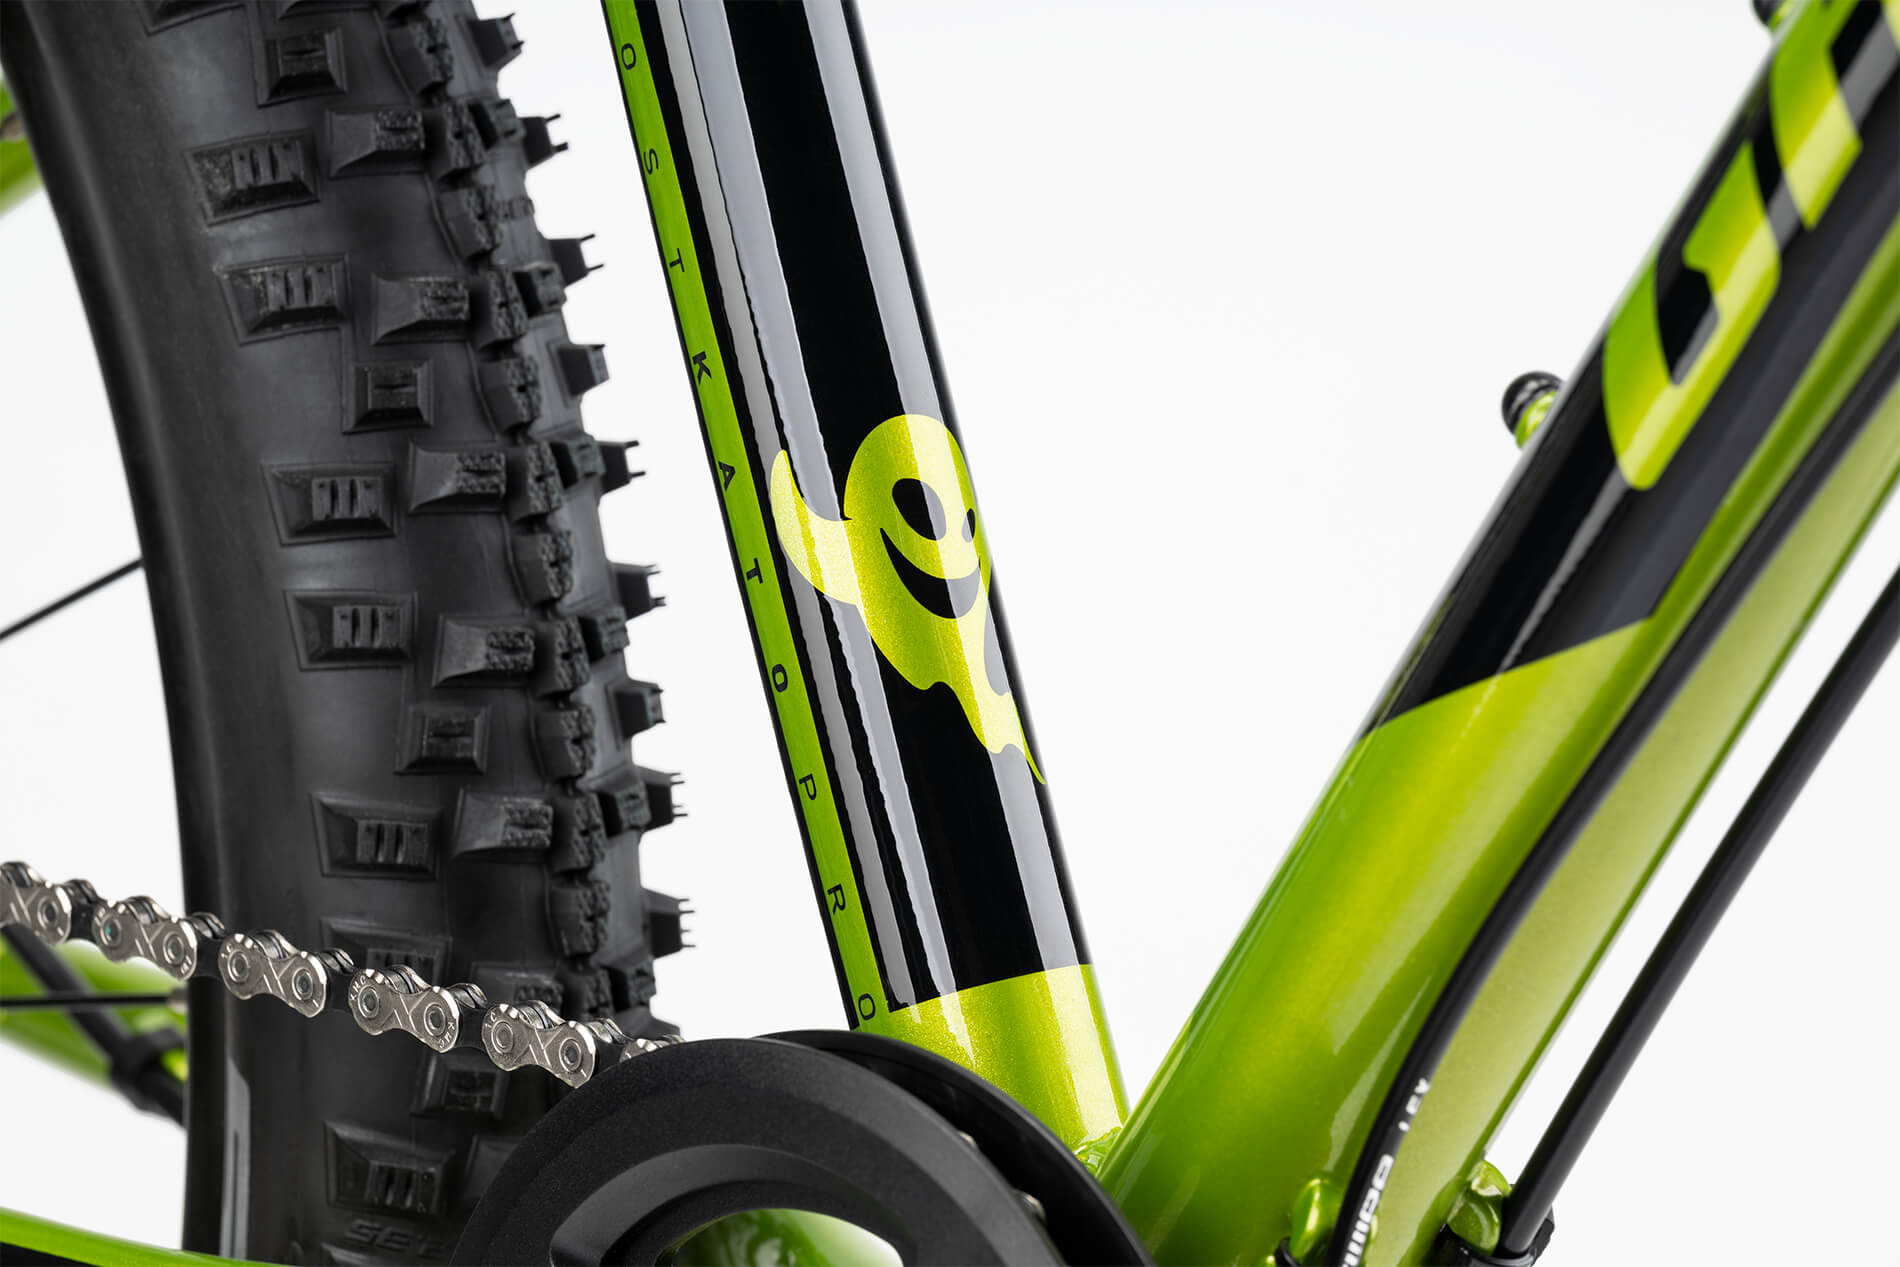 Ghost Kato 24 Pro candy lime green/black - glossy